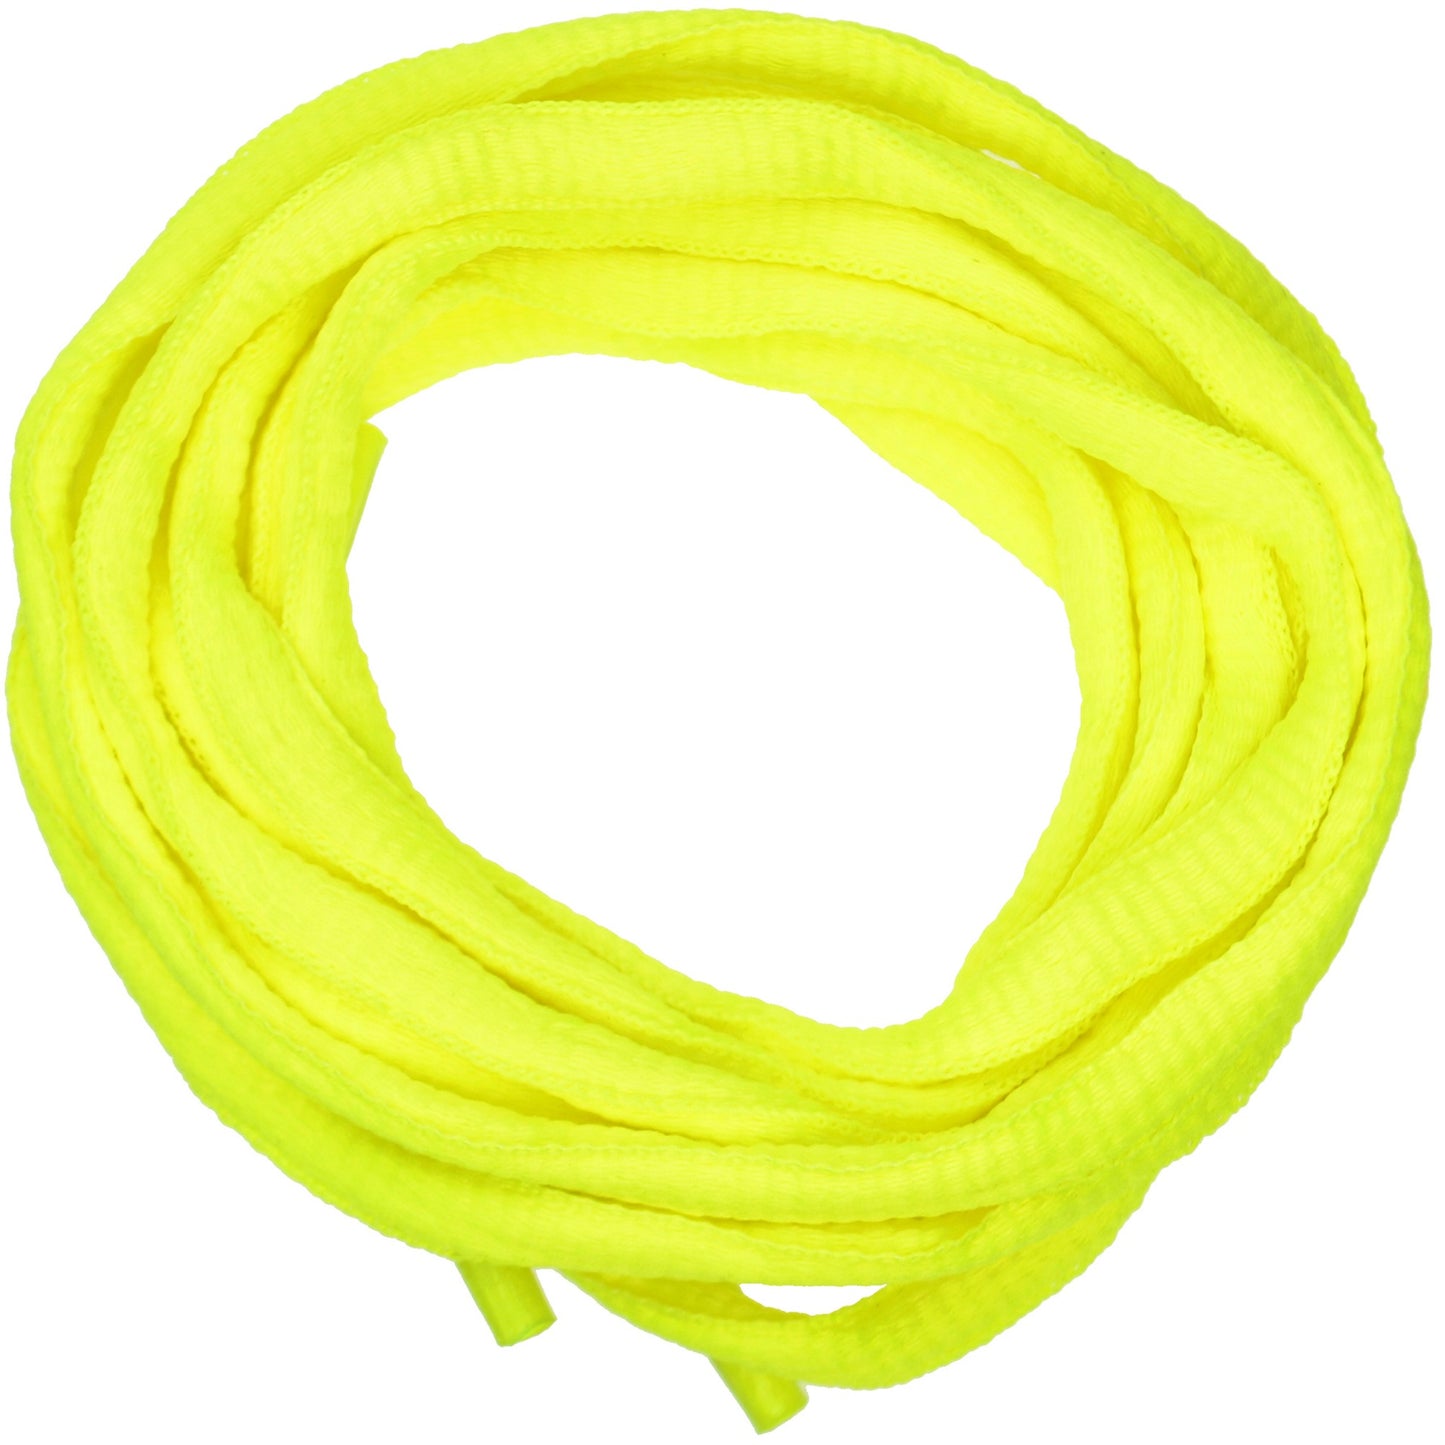 130cm Oval Trainer Laces - Fluorescent Yellow